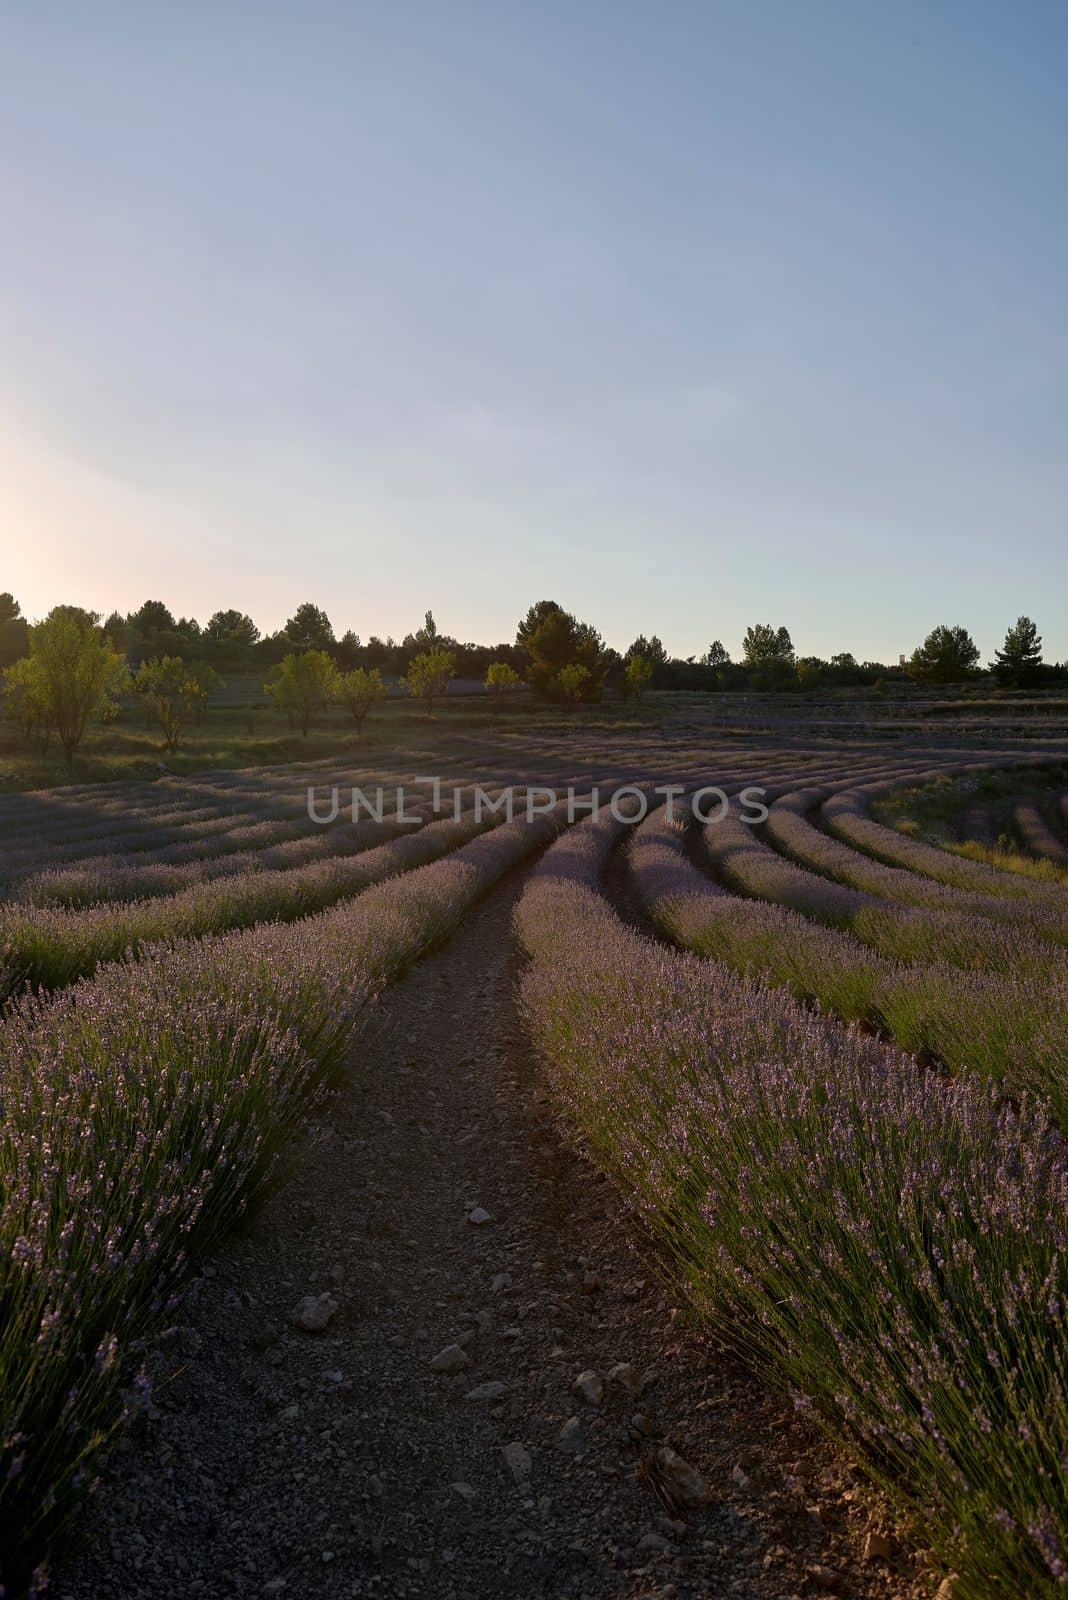 A lavender field in bloom on a sunny day by raul_ruiz